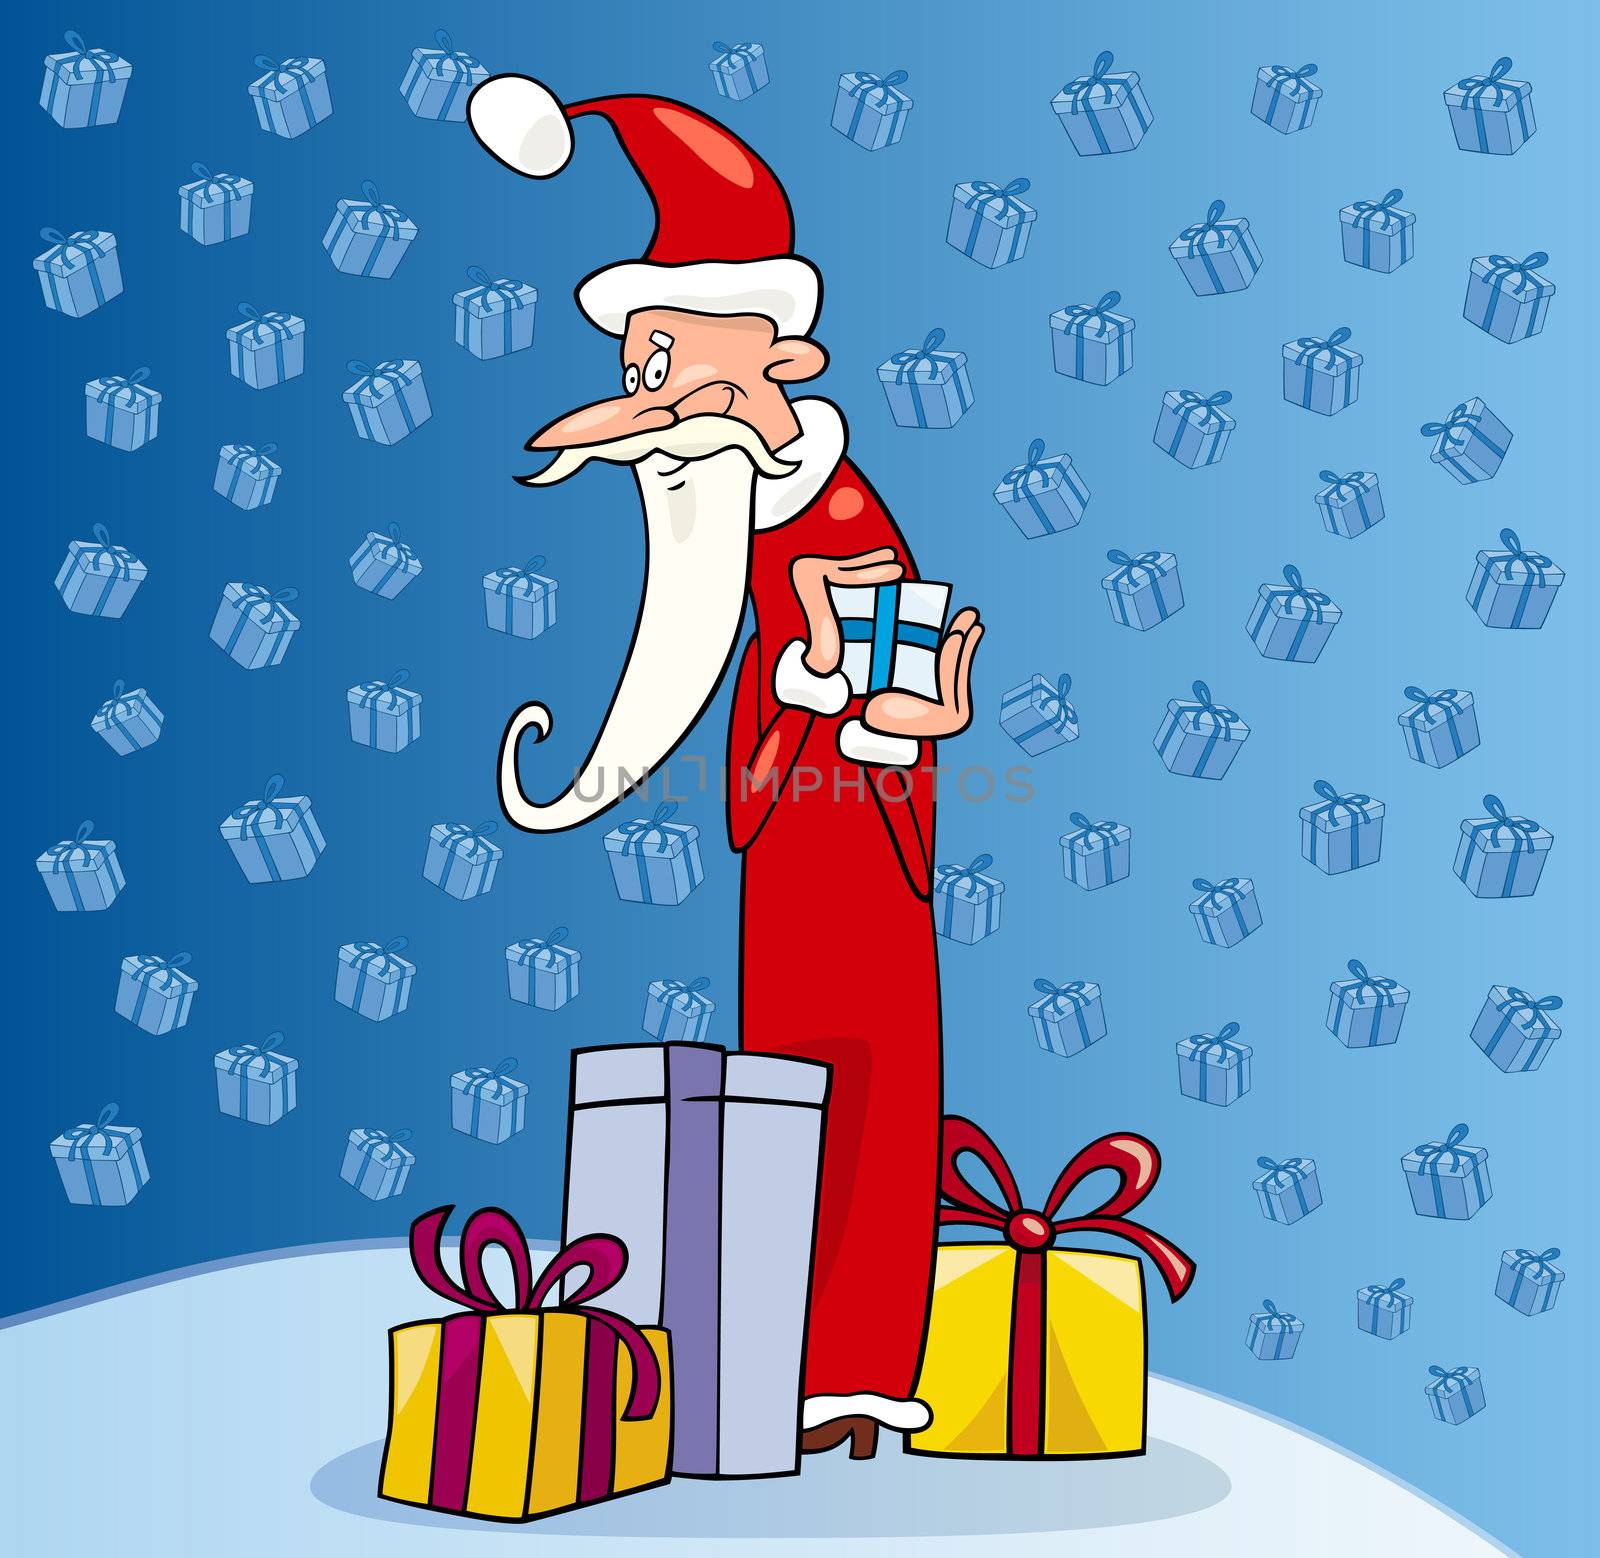 Cartoon Illustration of Funny Santa Claus or Papa Noel with Christmas Presents and Gifts